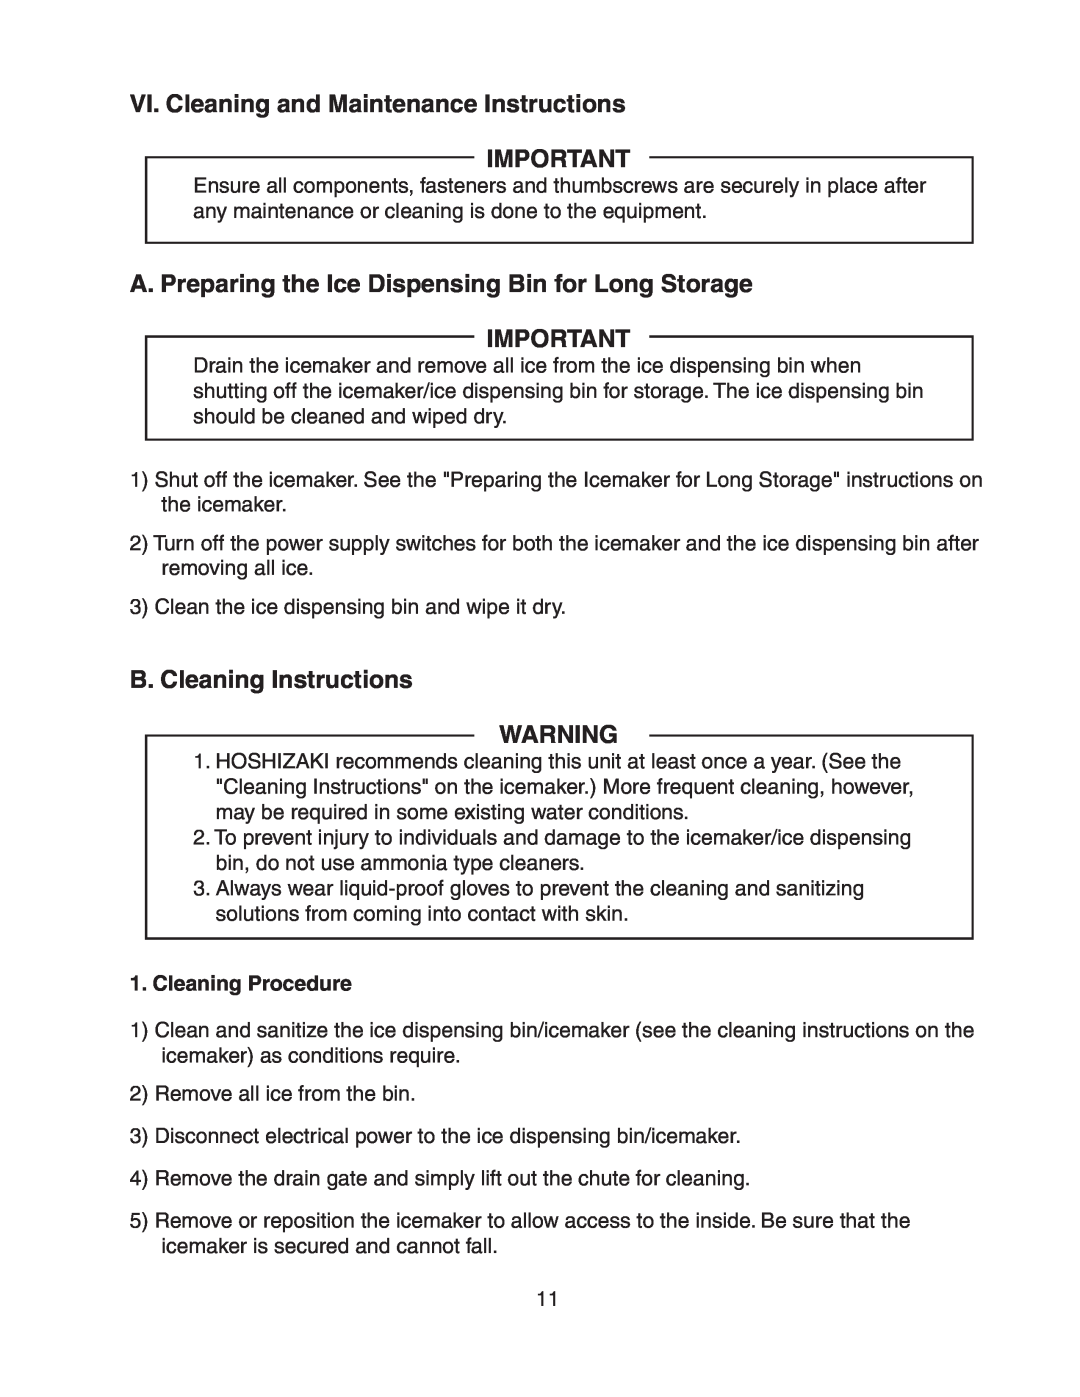 Hoshizaki DB-130H service manual VI. Cleaning and Maintenance Instructions, B. Cleaning Instructions, Cleaning Procedure 